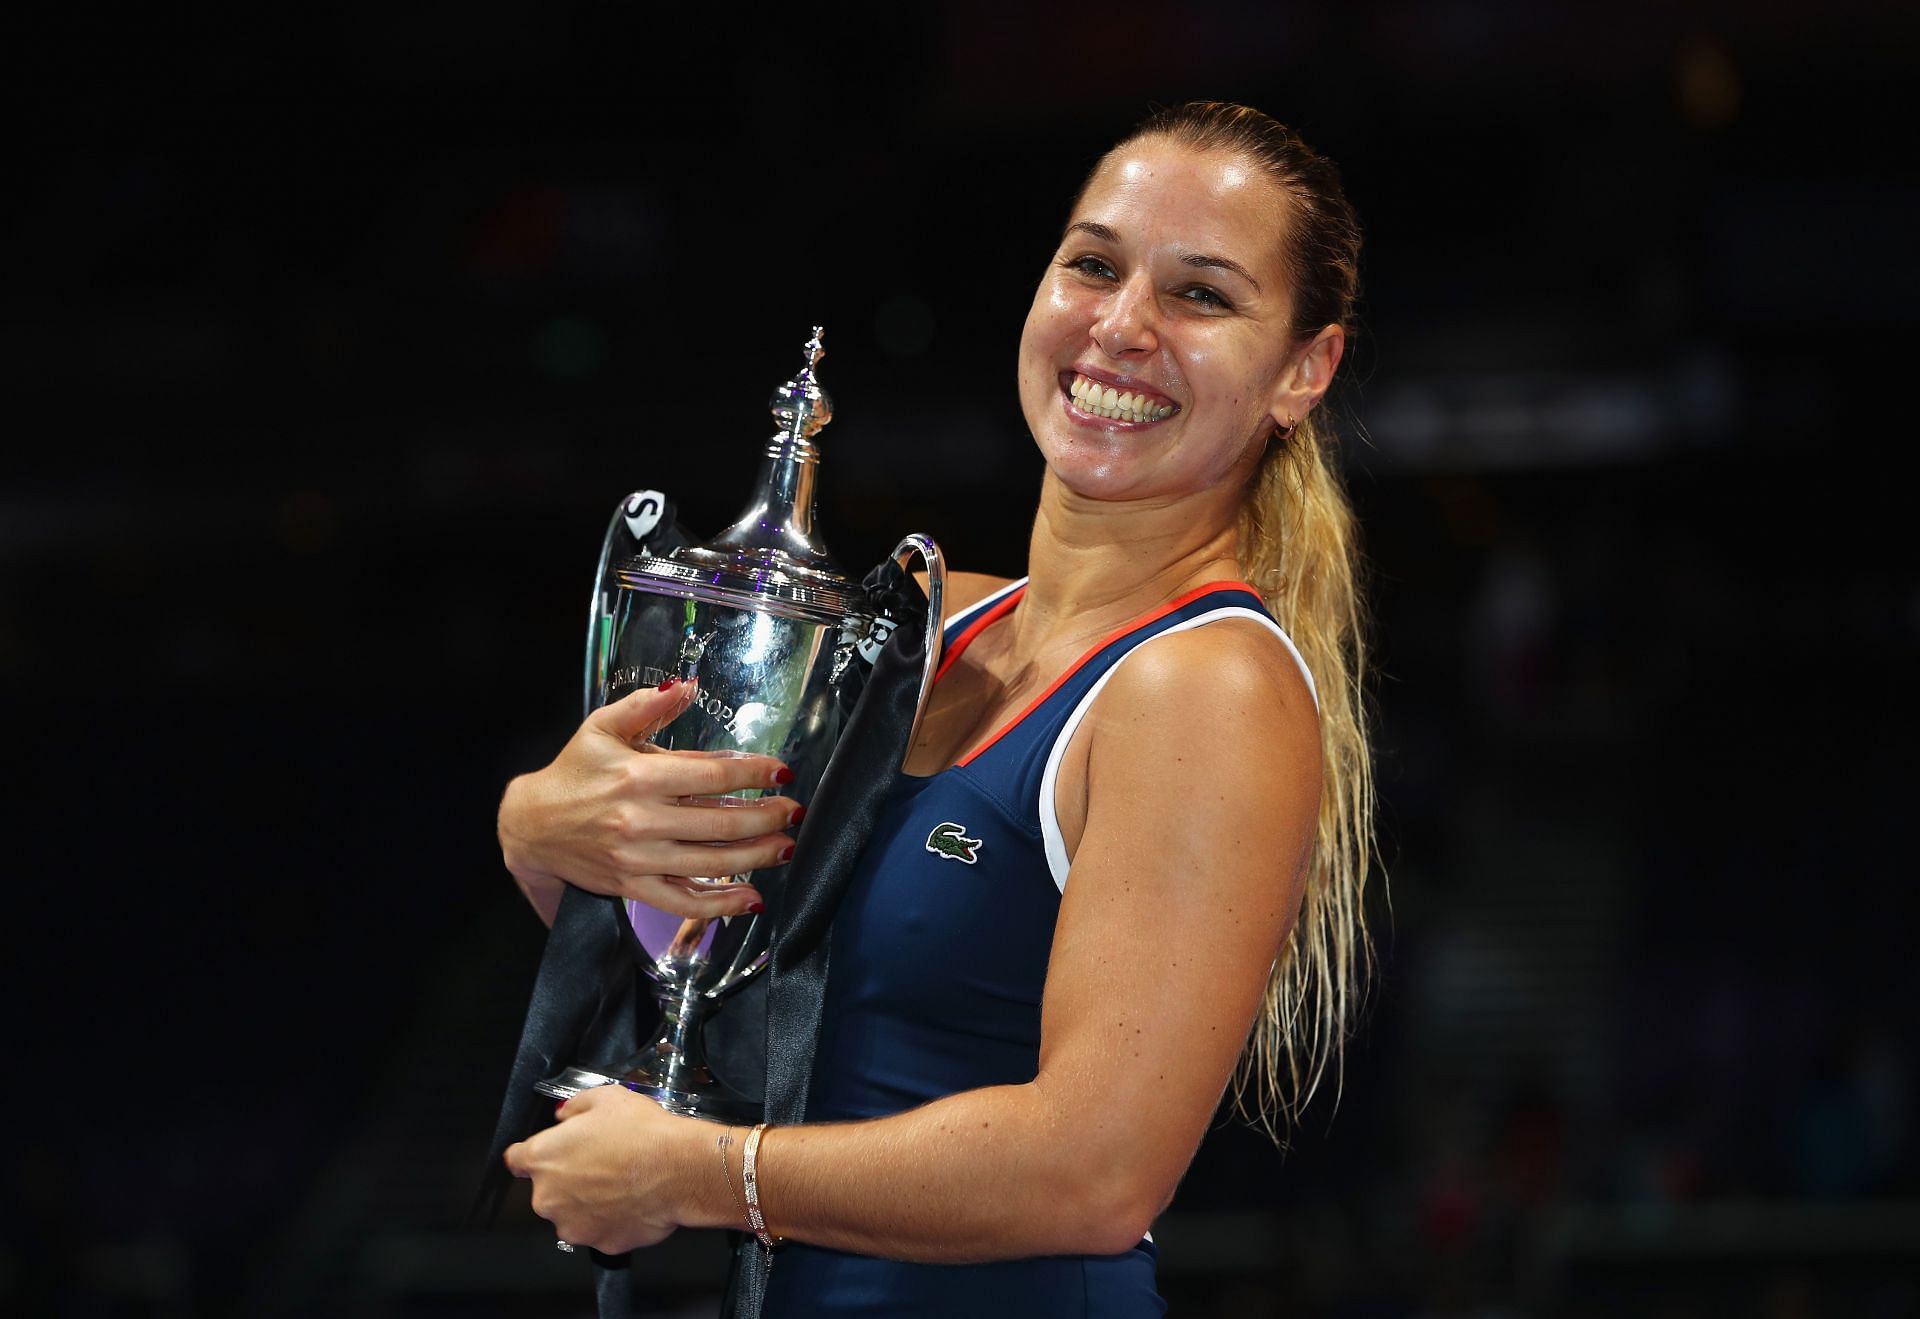 Dominika Cibulkova rose to as high as World No. 4 but reached only one Slam final